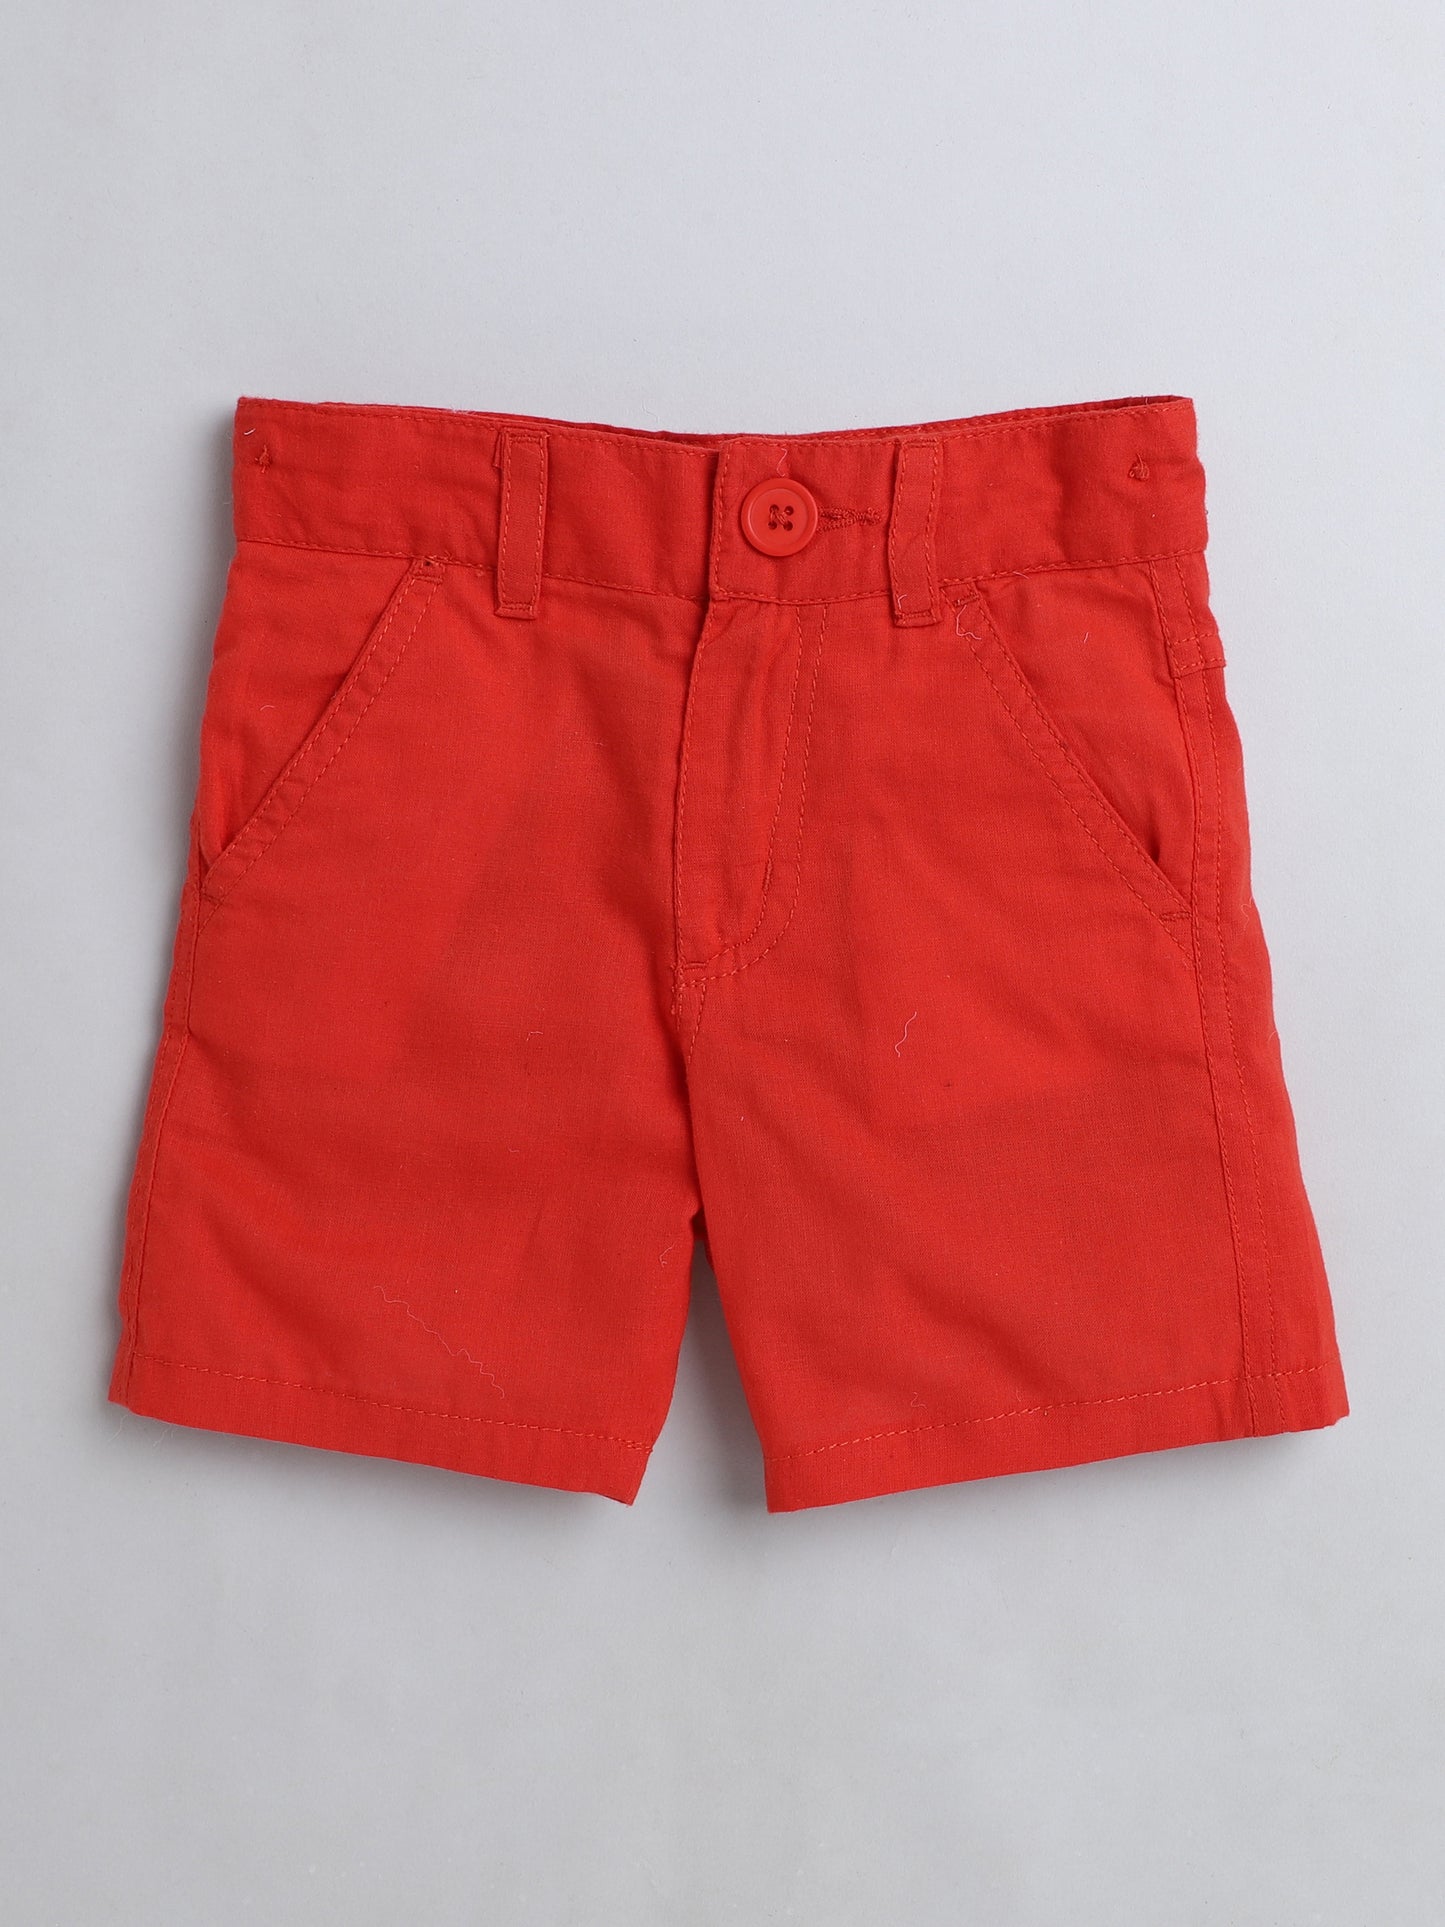 Knitting Doodles Pure Cotton Boys' Shorts wih Adjustable Waist- Red